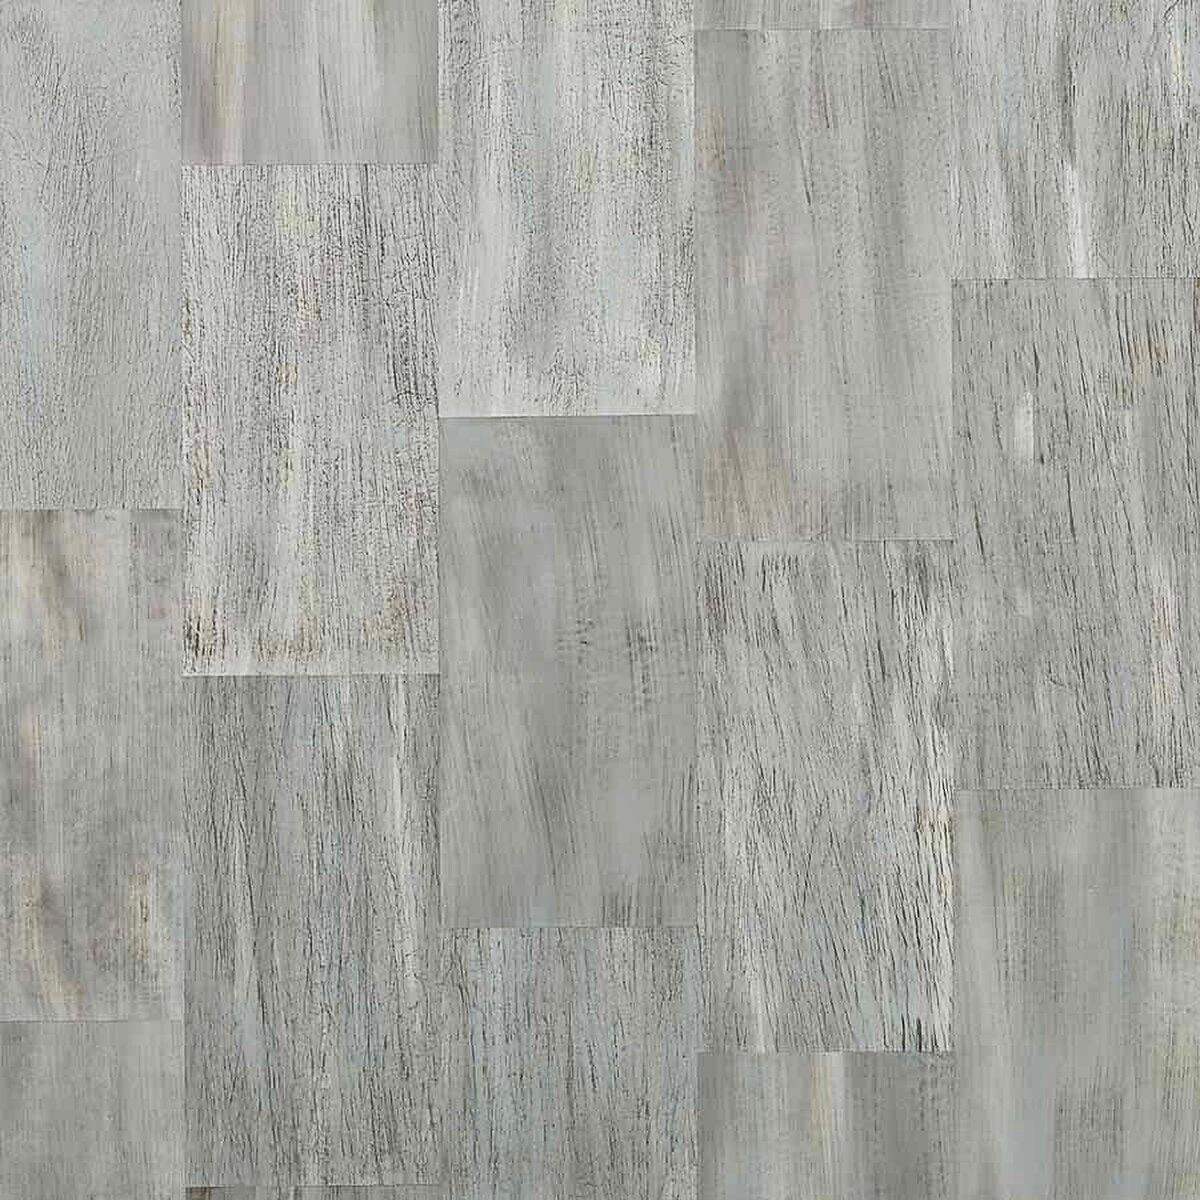 Contemporary Phillip Jeffries Specialty Ox Horn, Gray Wood Wallcovering, Handmade, PJ 2904 For Sale